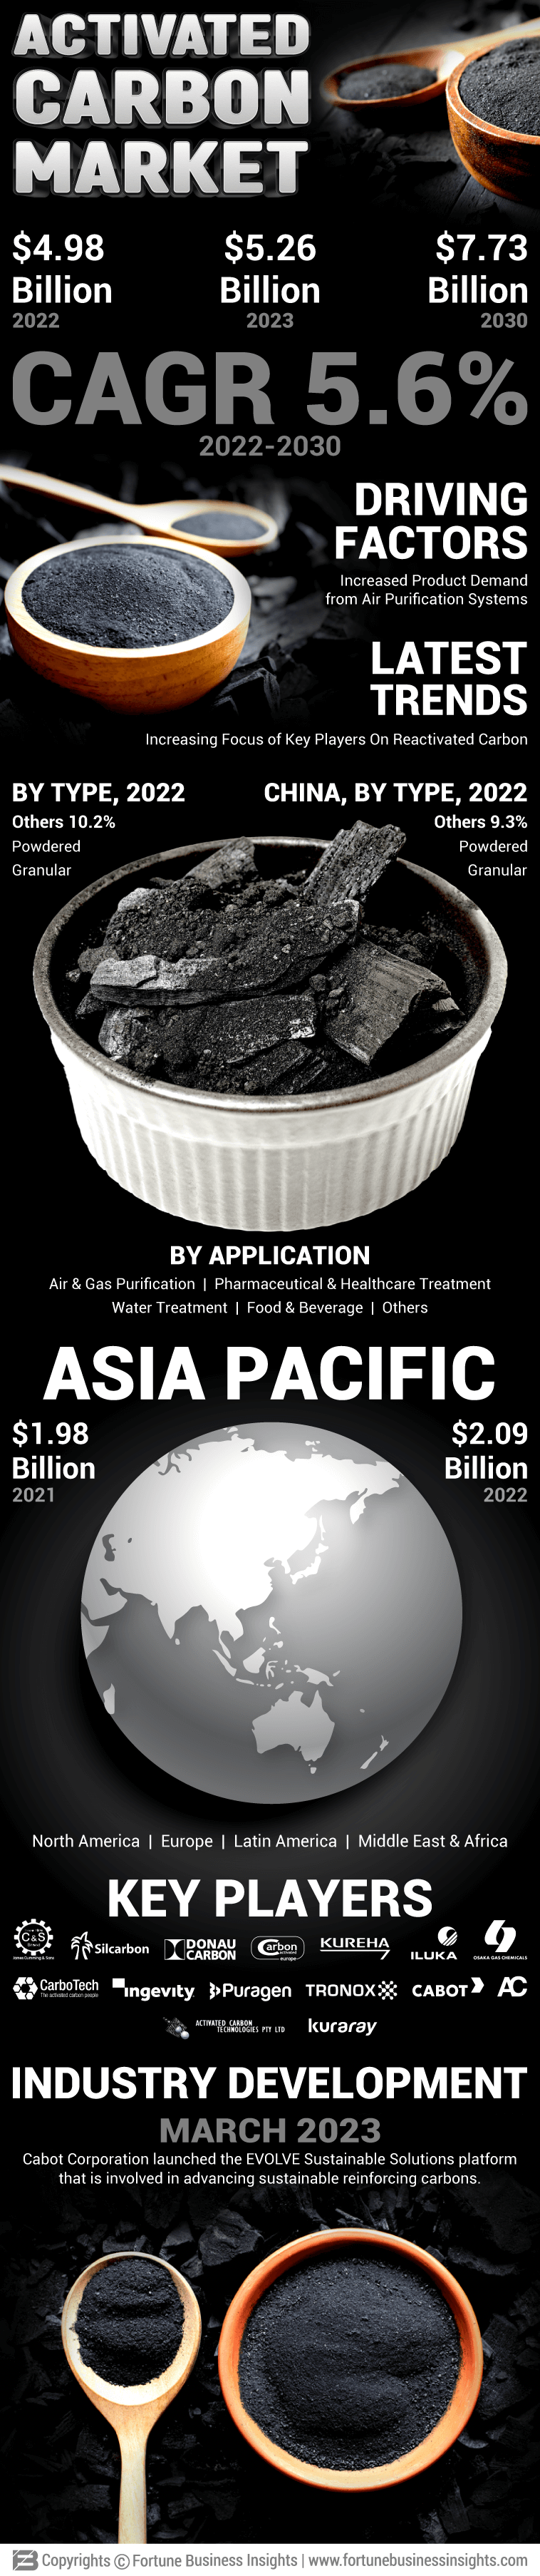 Activated Carbon Market 